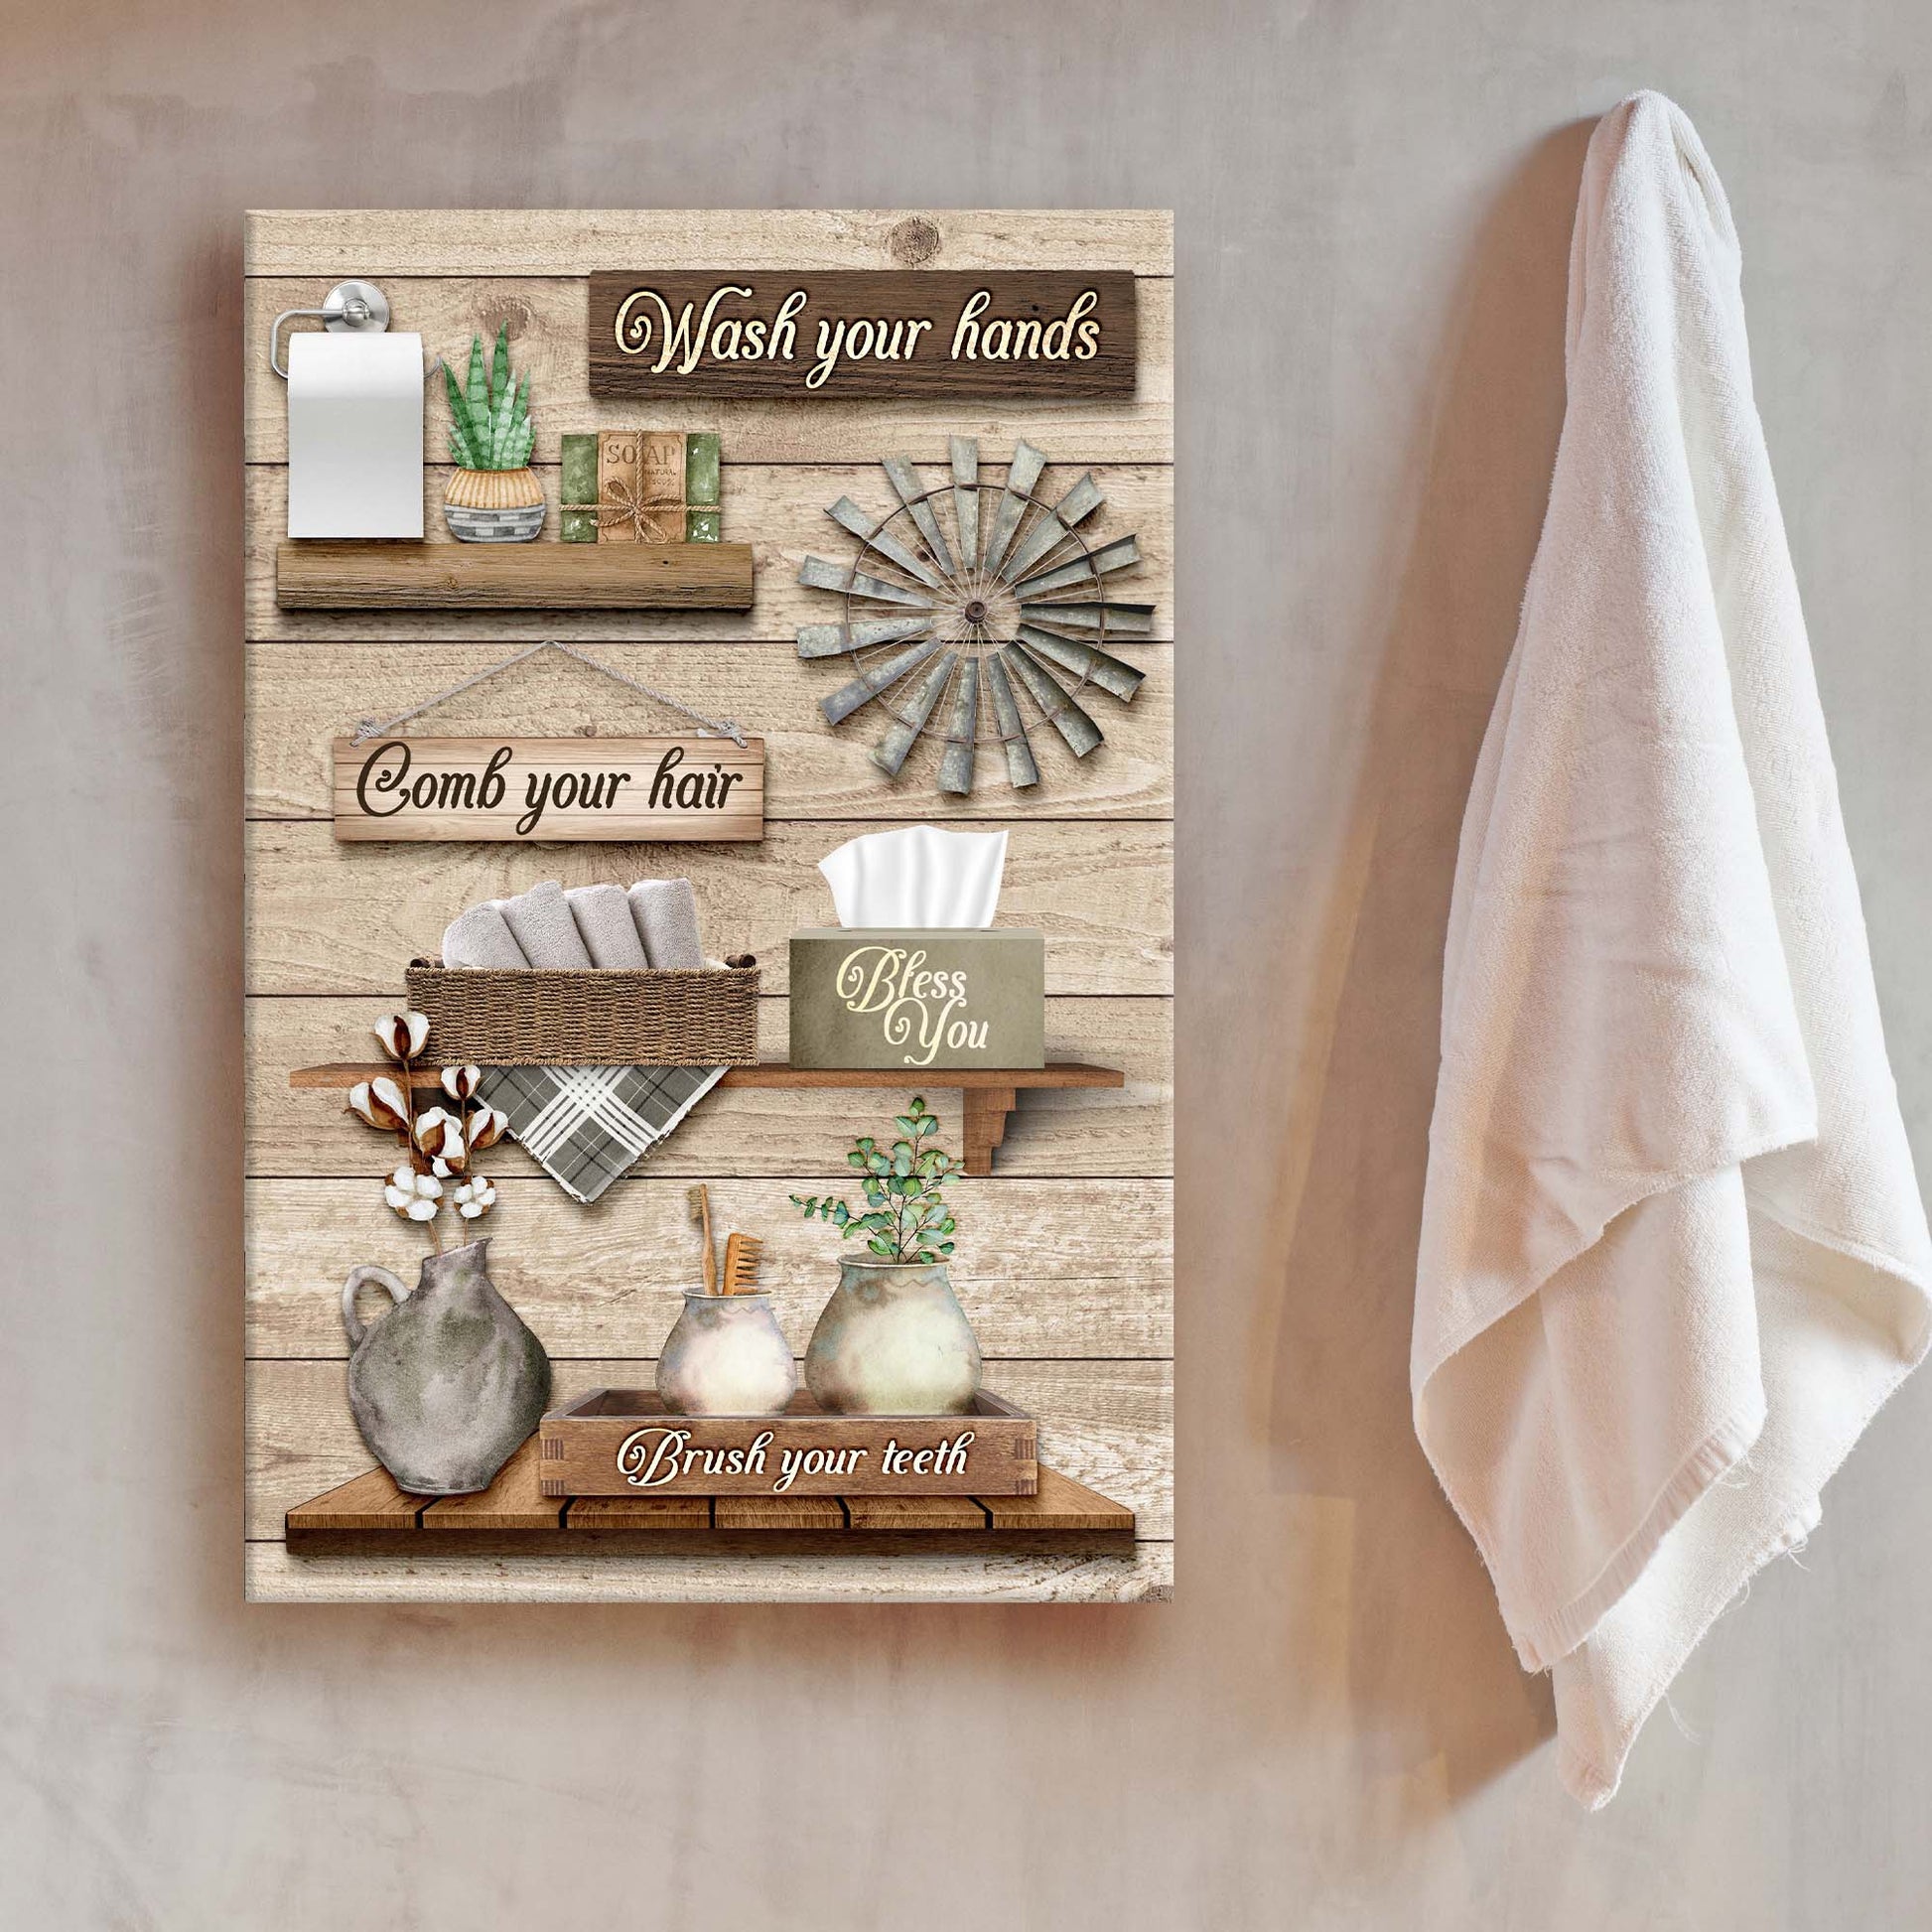 Wash Your Hands Bathroom Sign  - Image by Tailored Canvases